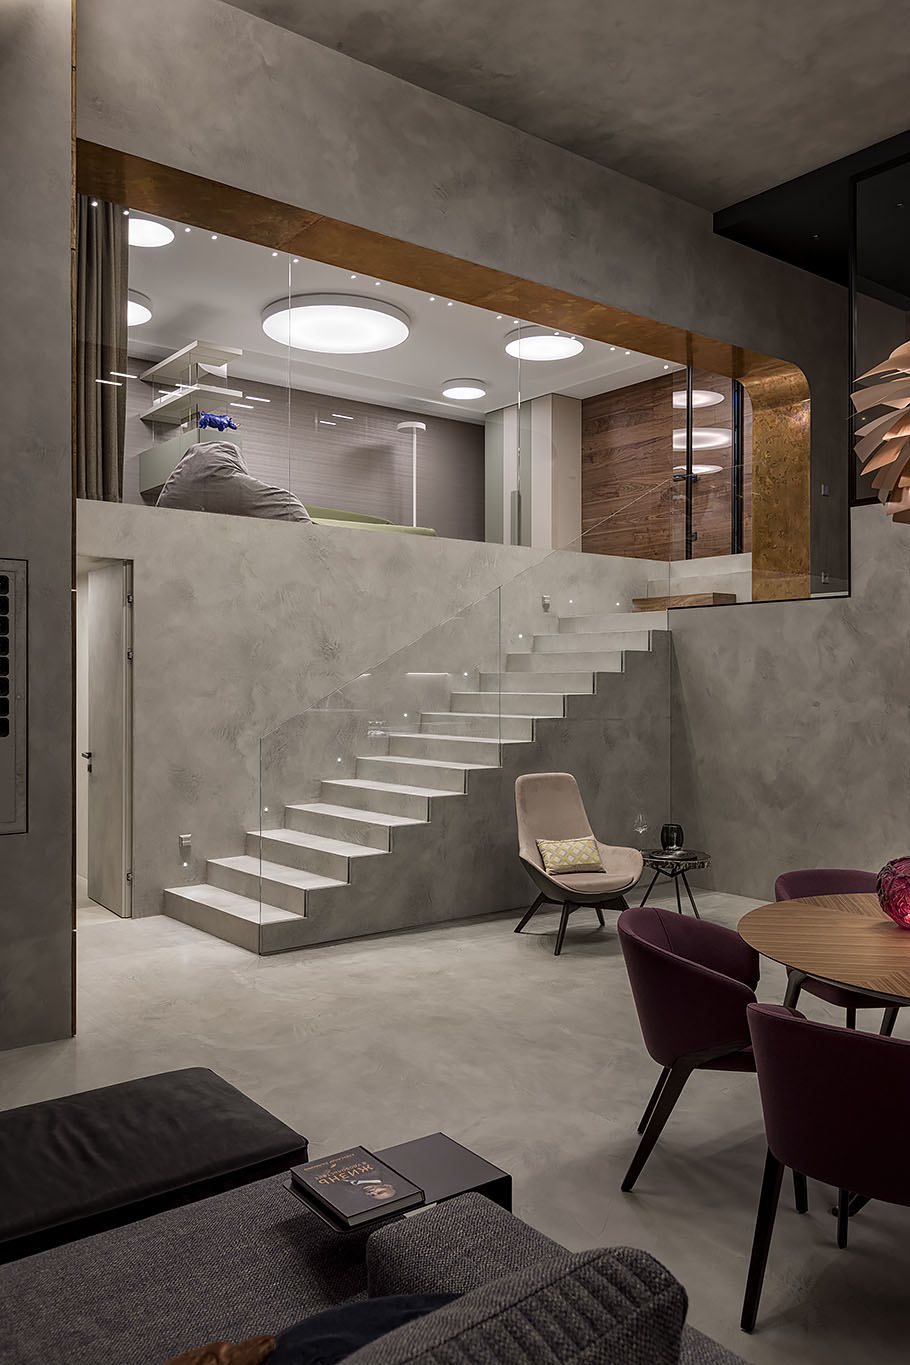 Luxurious apartment with microcement on walls, stairs, and floor.